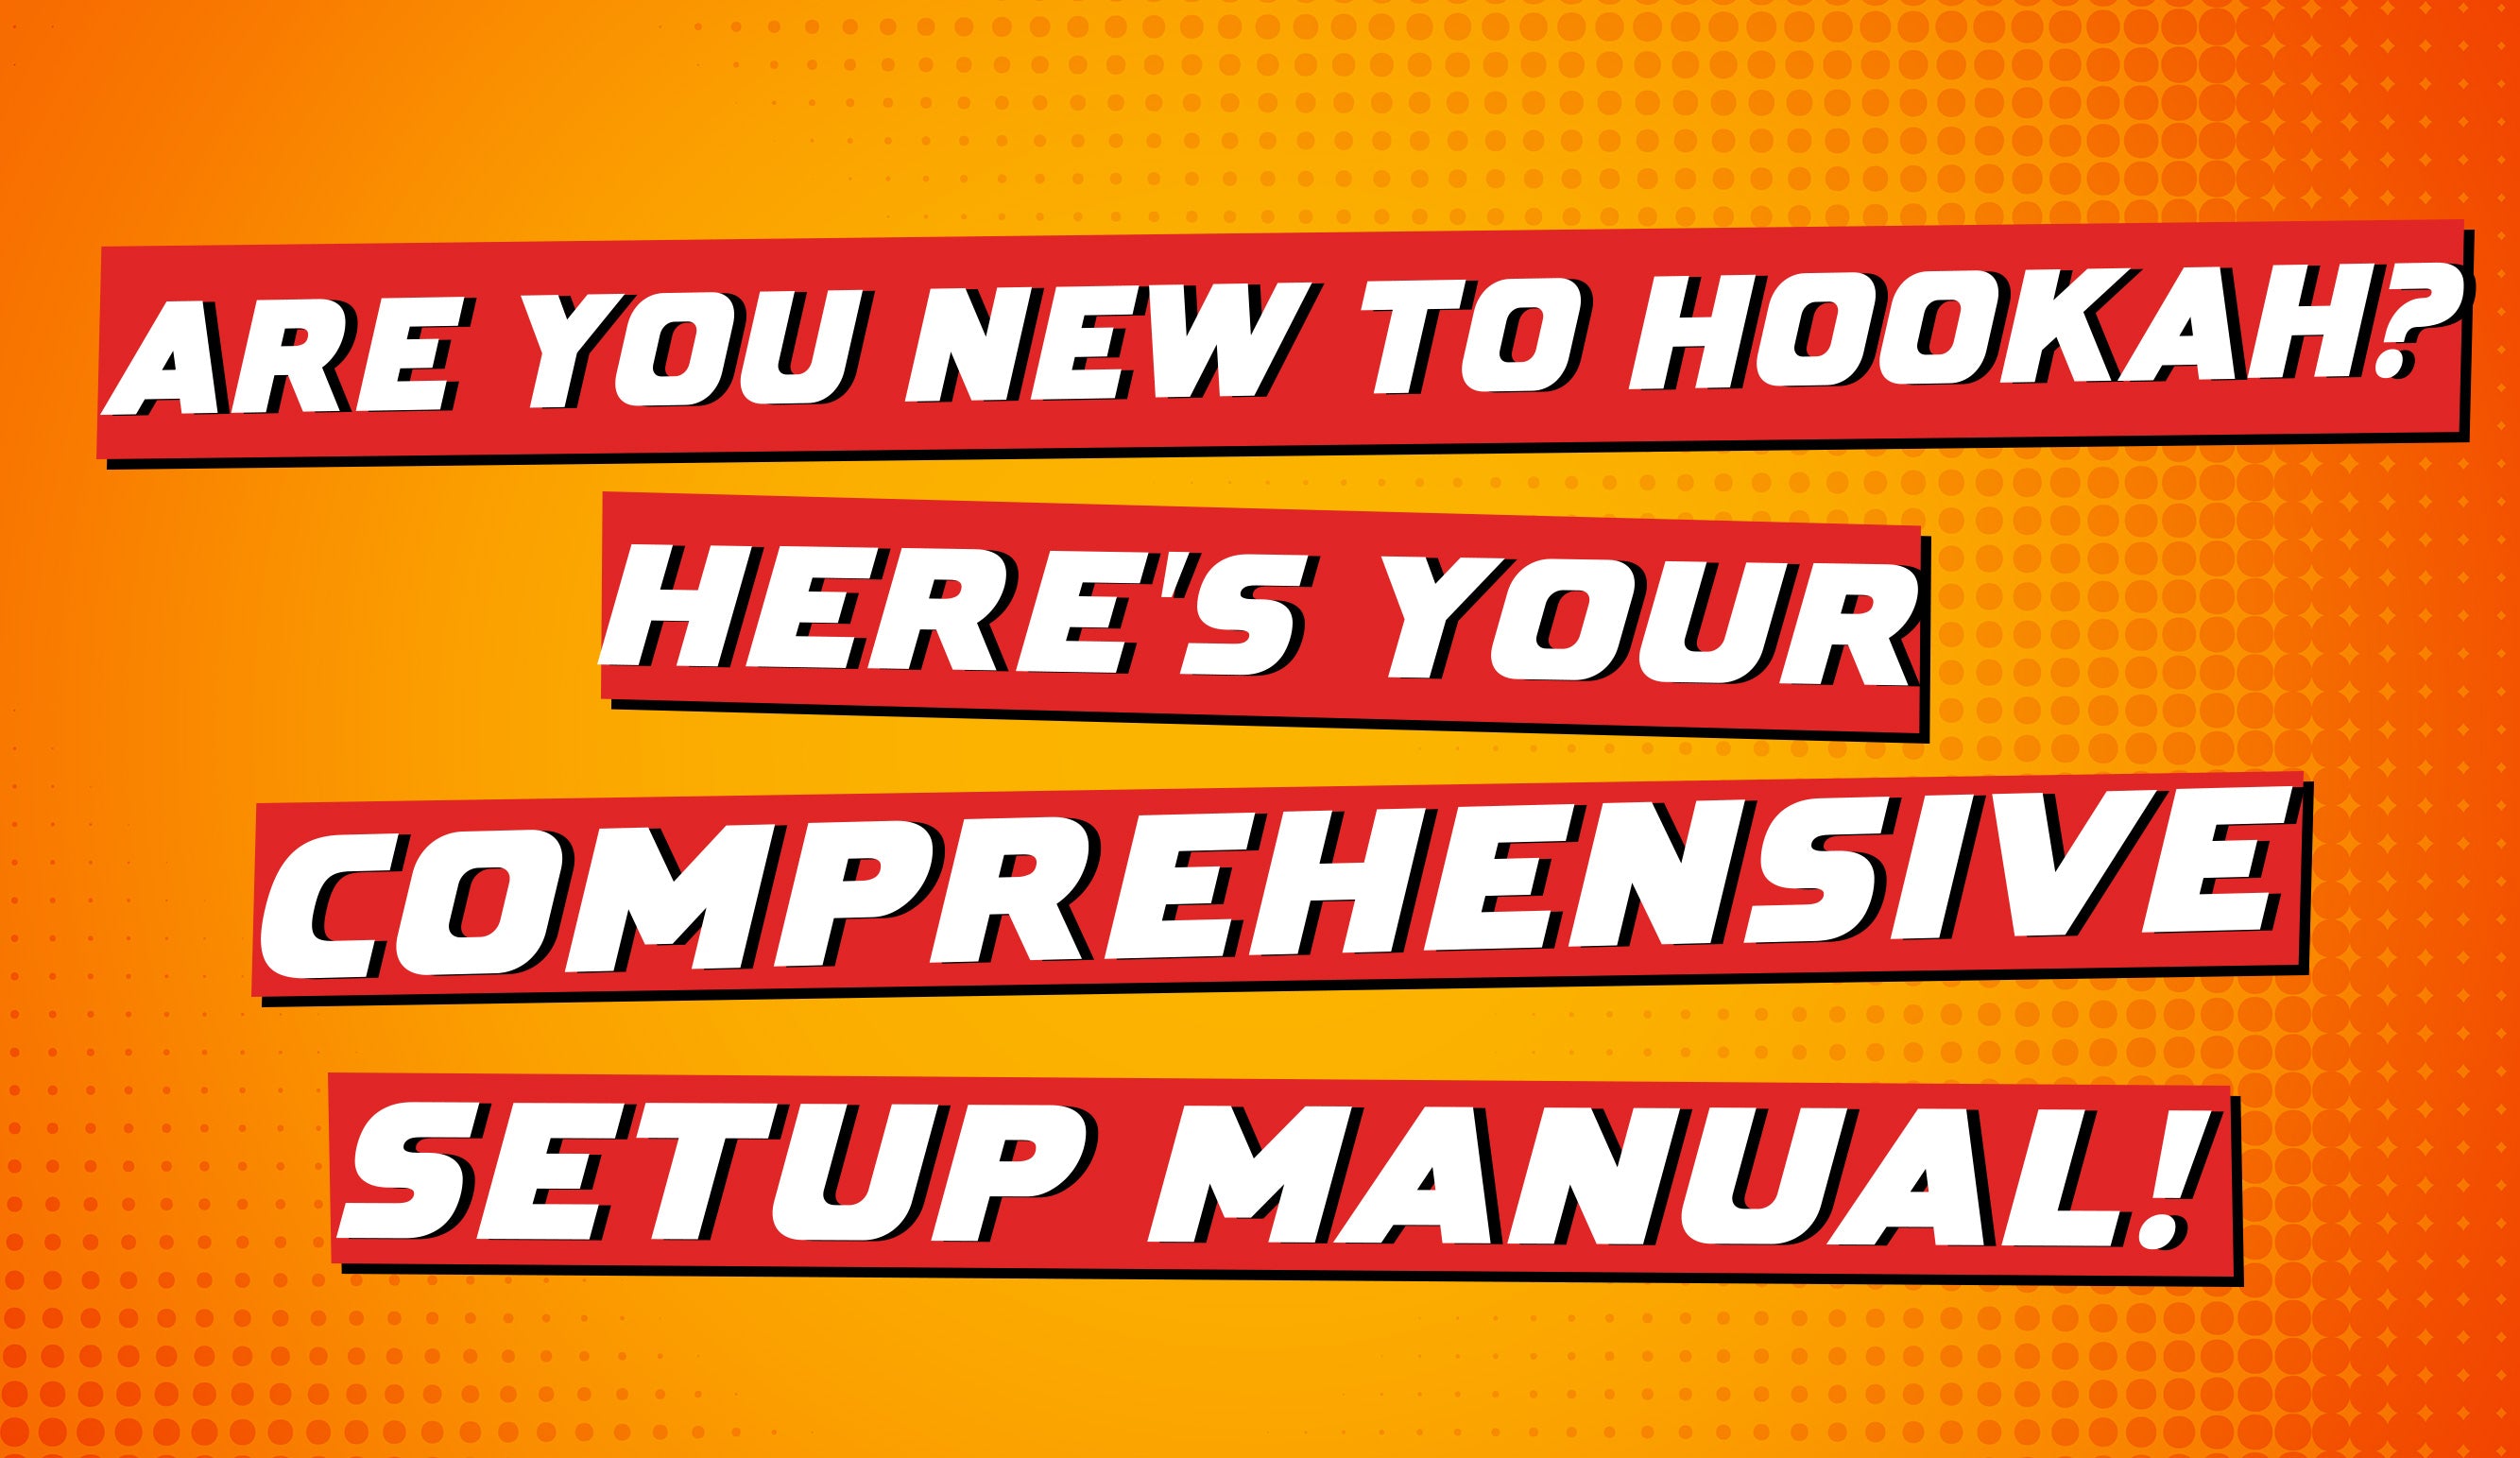 Are You New to Hookah? Here's Your Comprehensive Setup Manual!